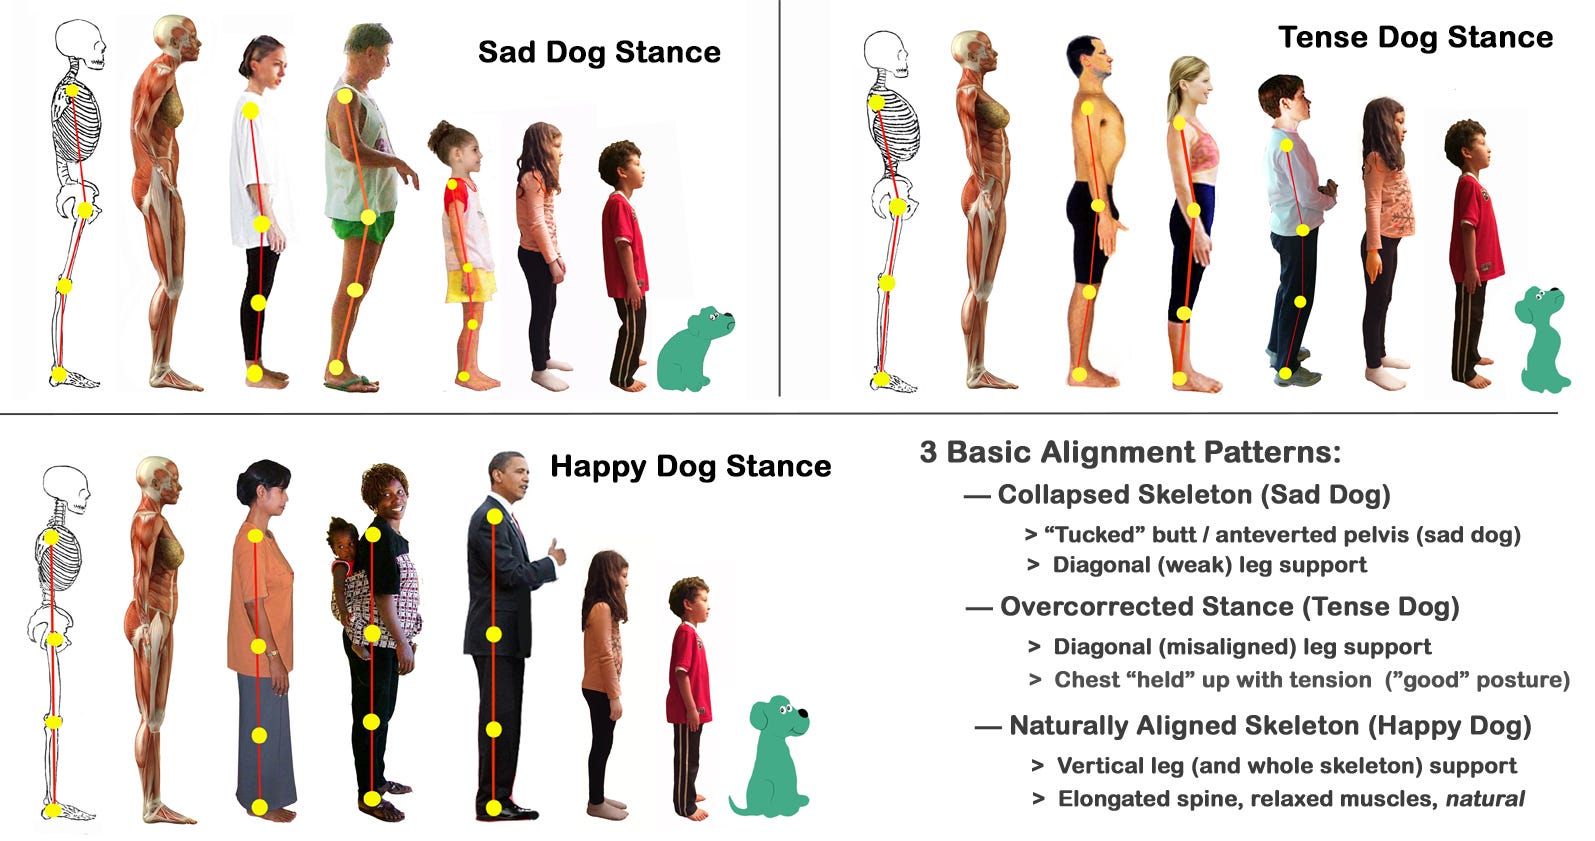 Its all about posture and performance， the ultimate winning alignment！